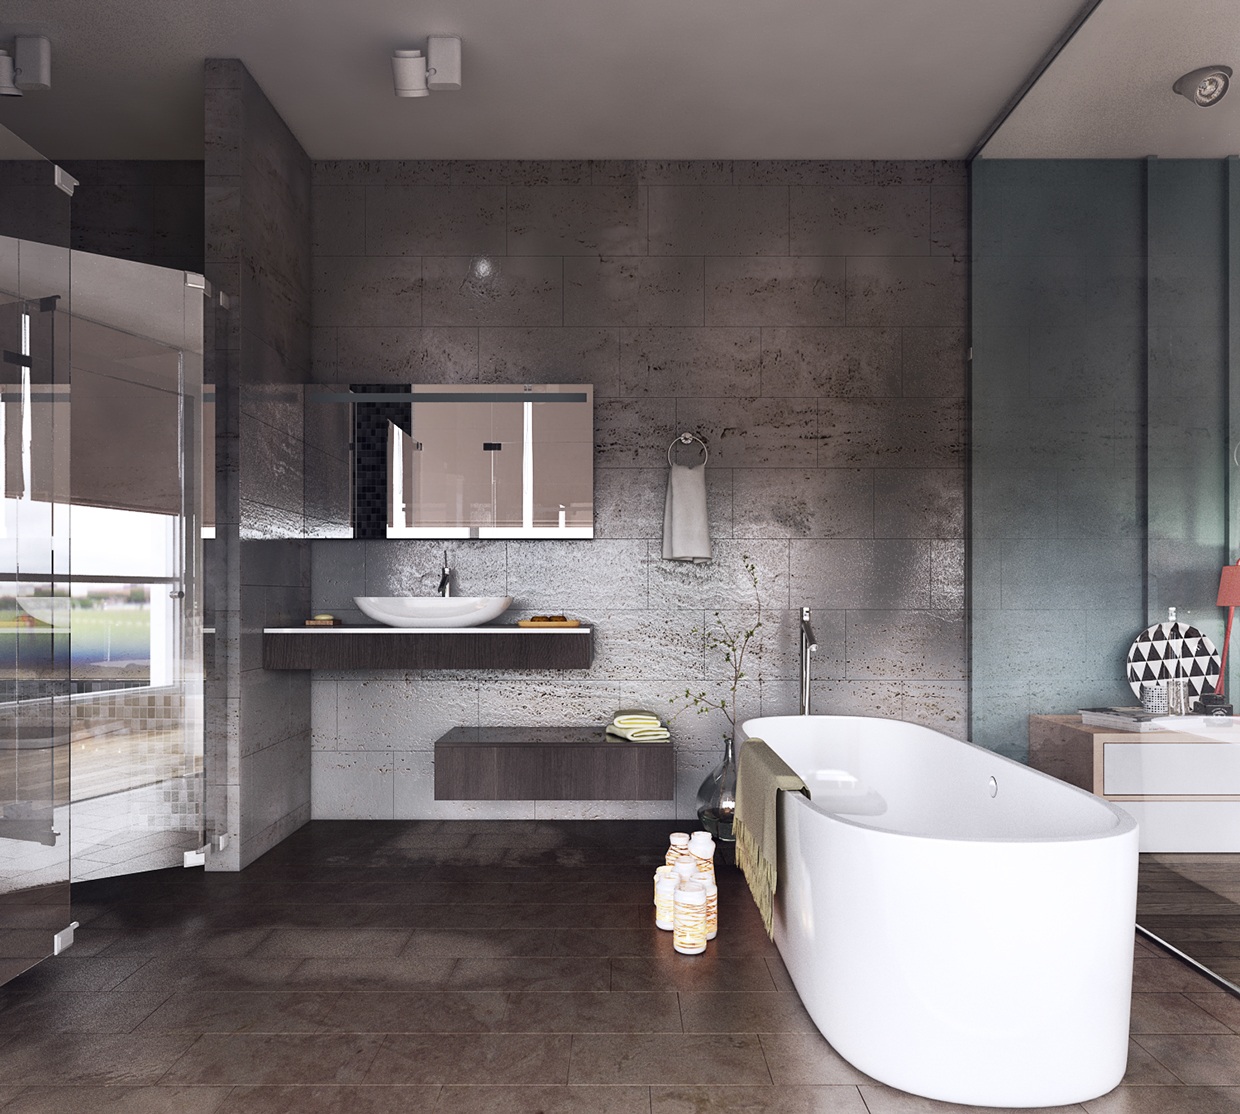 modern bathroom decor "width =" 1240 "height =" 1114 "srcset =" https://mileray.com/wp-content/uploads/2020/05/1588515112_650_Tips-How-To-Create-a-Beautiful-and-Awesome-Bathroom-Decor.jpg 1240w, https: / /mileray.com/wp-content/uploads/2016/09/modern-soaking-tub-Koj-Design-300x270.jpg 300w, https://mileray.com/wp-content/uploads/2016/09/modern - soaking-tub-Koj-Design-768x690.jpg 768w, https://mileray.com/wp-content/uploads/2016/09/modern-soaking-tub-Koj-Design-1024x920.jpg 1024w, https: / / mileray.com/wp-content/uploads/2016/09/modern-soaking-tub-Koj-Design-696x625.jpg 696w, https://mileray.com/wp-content/uploads/2016/09/modern- soaking tub -Koj-Design-1068x959.jpg 1068w, https://mileray.com/wp-content/uploads/2016/09/modern-soaking-tub-Koj-Design-468x420.jpg 468w "sizes =" (maximum width: 1240px) 100vw, 1240px